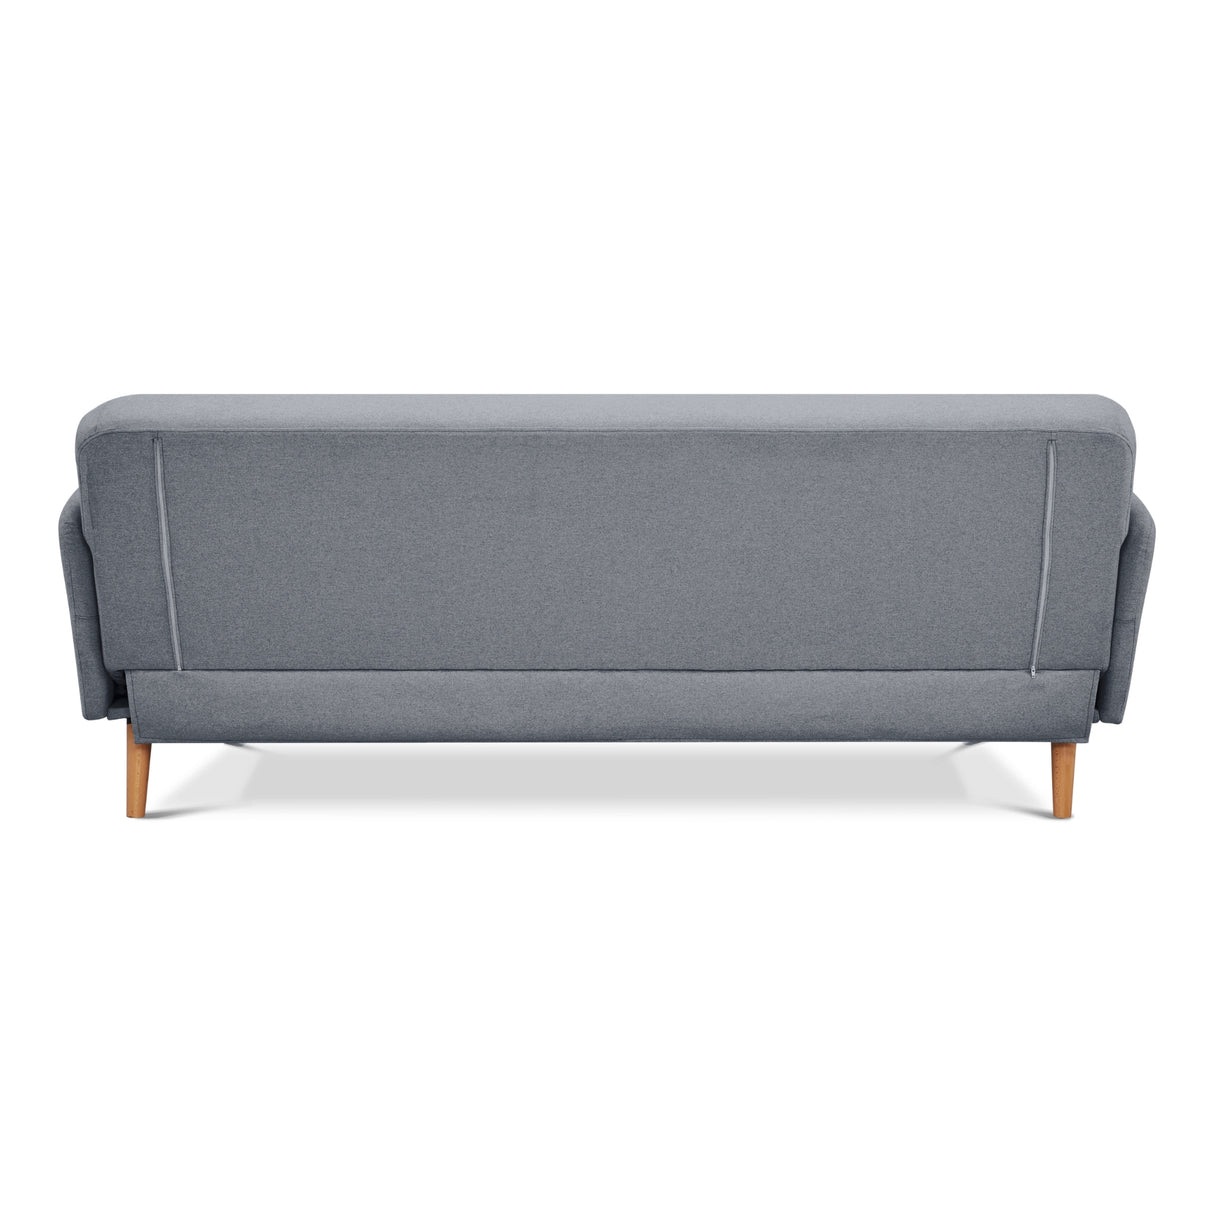 Brianna 3 Seater Sofa Bed Fabric Uplholstered Lounge Couch - Light Grey